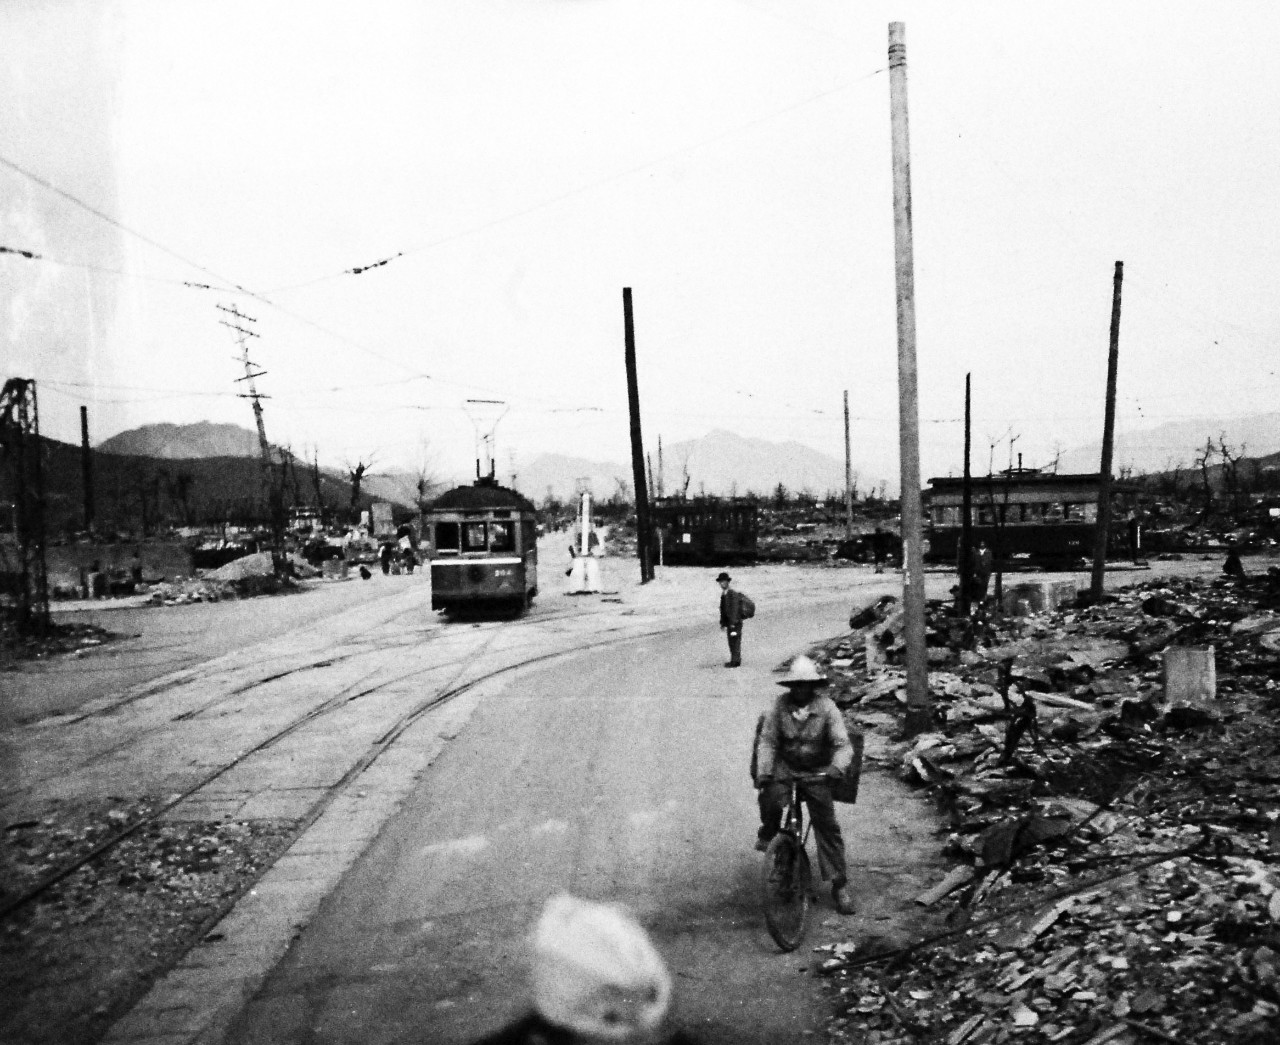 80-G-354617:  Hiroshima, Japan, 1945.   Atomic Bomb Damage to Hiroshima, as seen by USS Appalachian (AGC-1).   Trolley. Photographed by PhoM3/C George Almarez.  Photographed received October 26, 1945.   U.S. Navy photograph, now in the collections of the National Archives.  (2016/06/21).